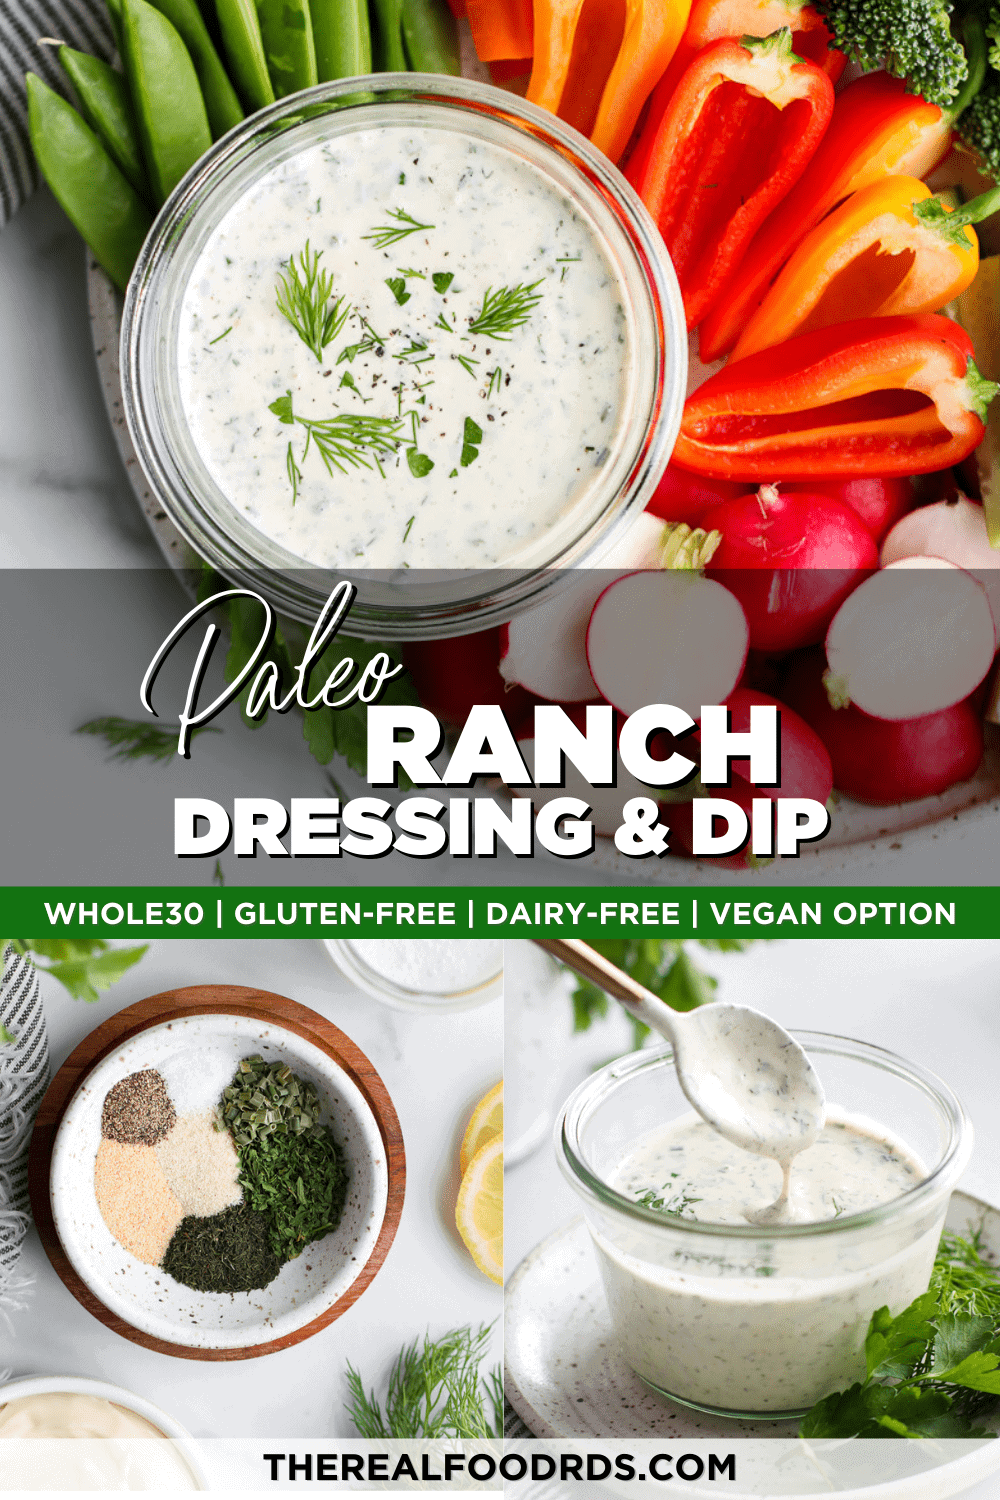 https://therealfooddietitians.com/wp-content/uploads/2016/05/Paleo-Ranch-Dressing-1000x1500-1.png